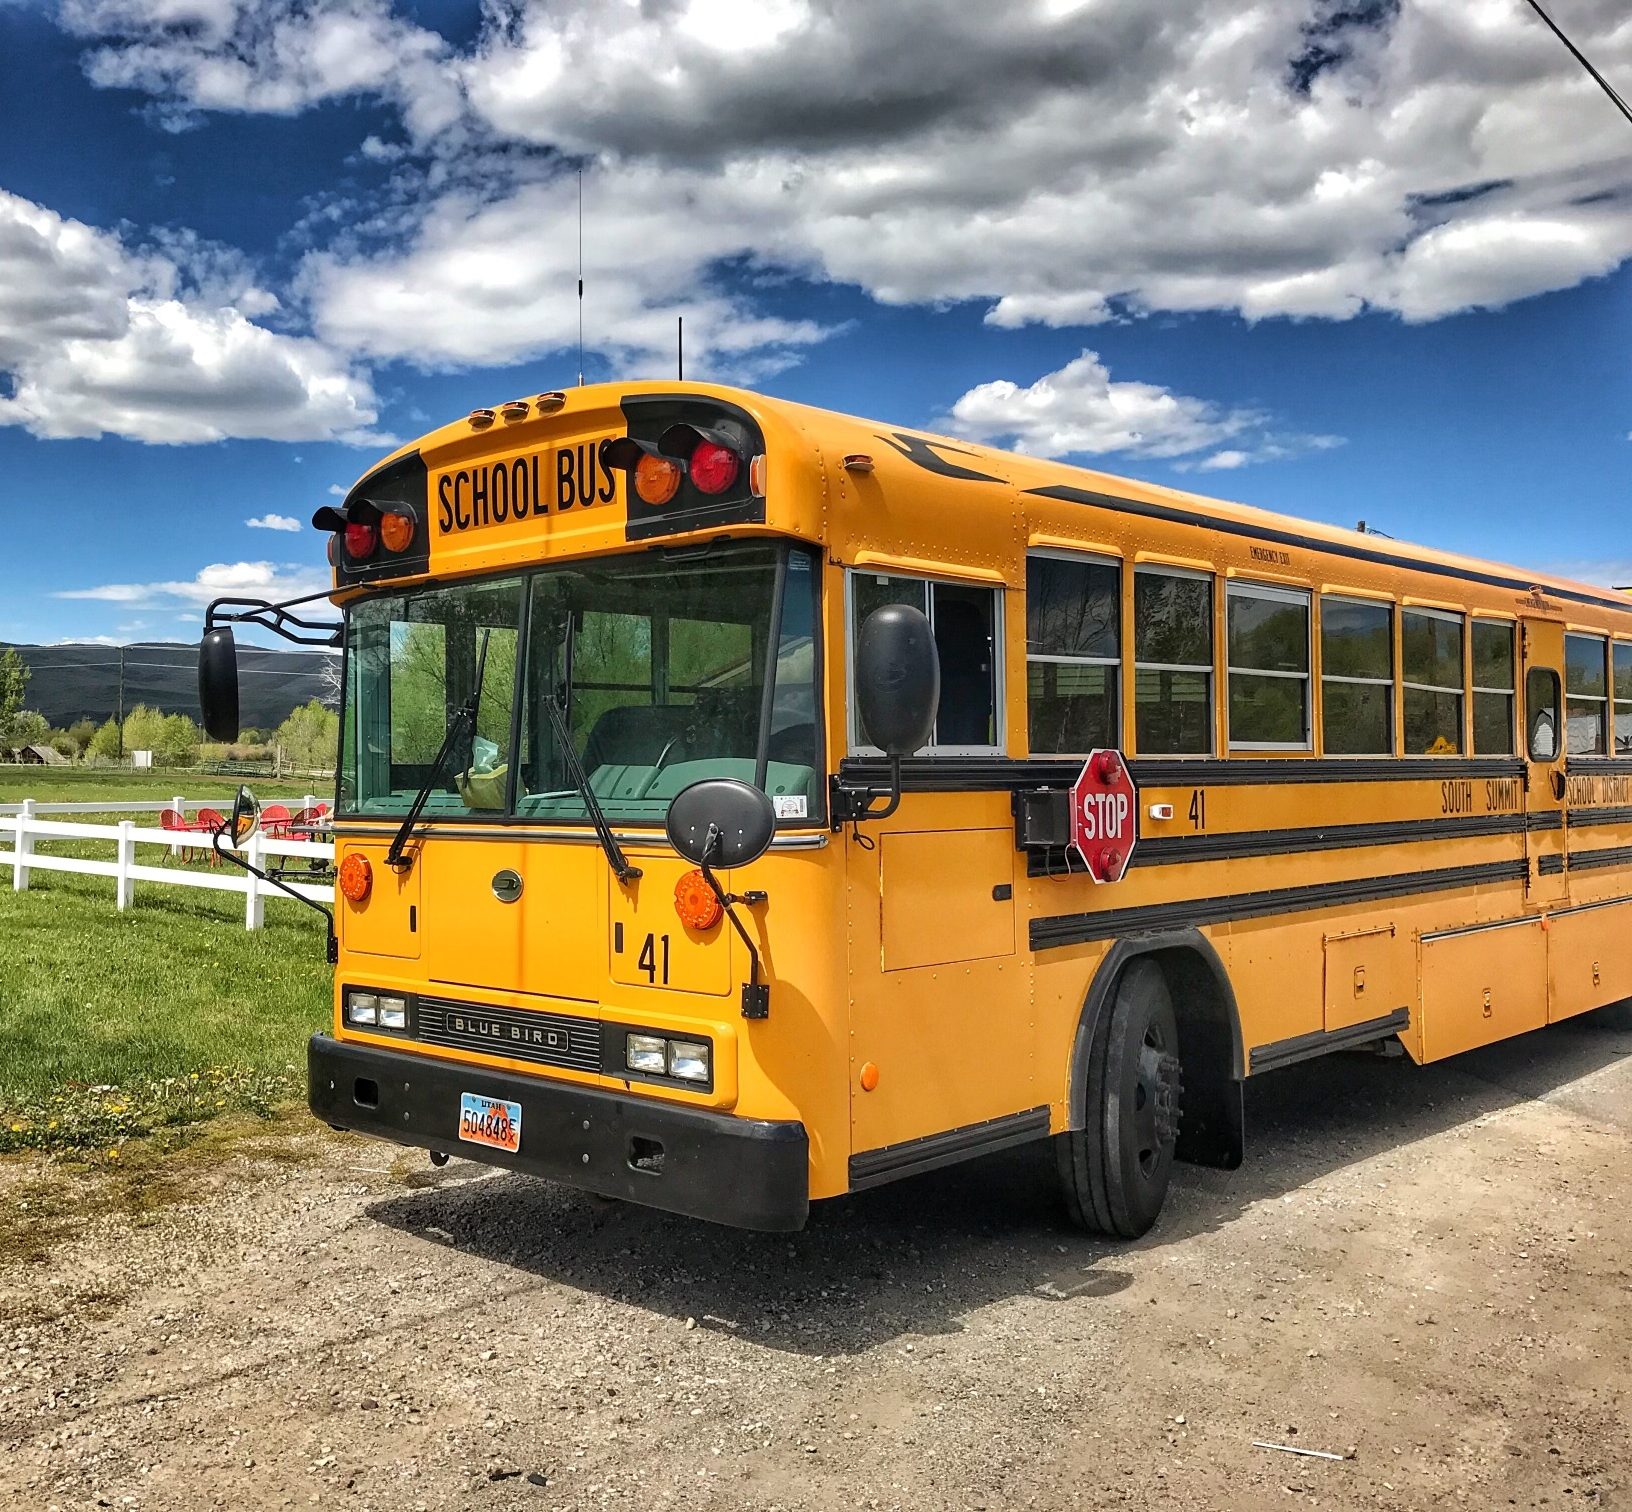 Stories, Pivots, and Driving a School Bus